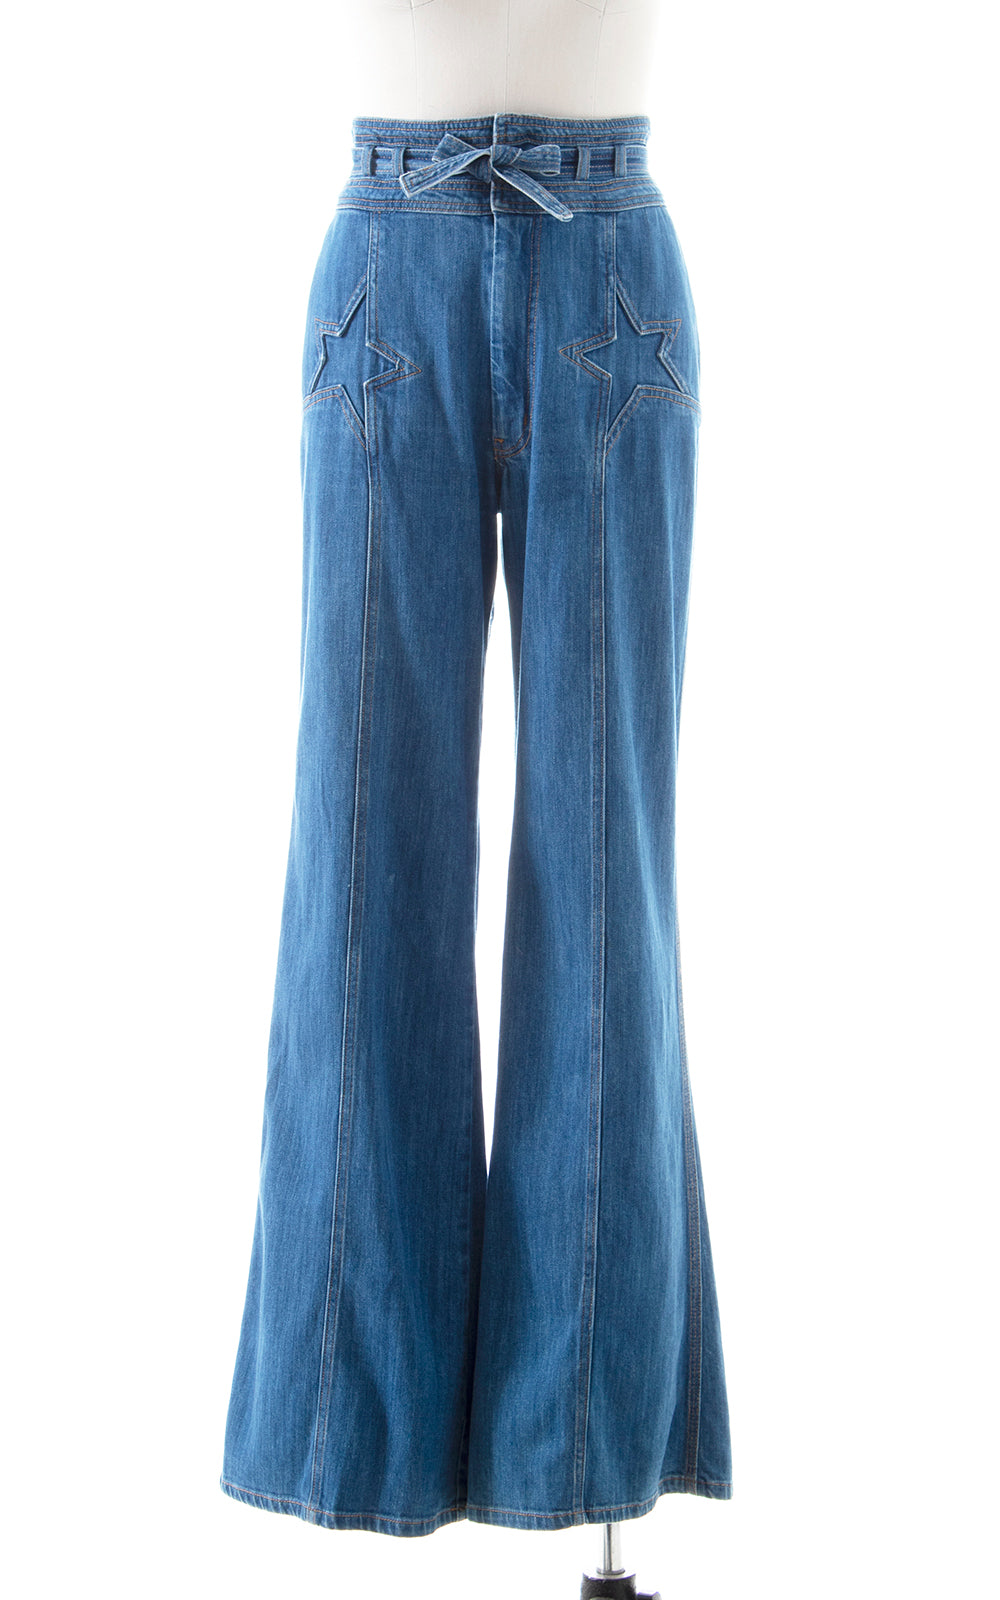 Modern STONED IMMACULATE 1970s Style Star Jeans | medium/large